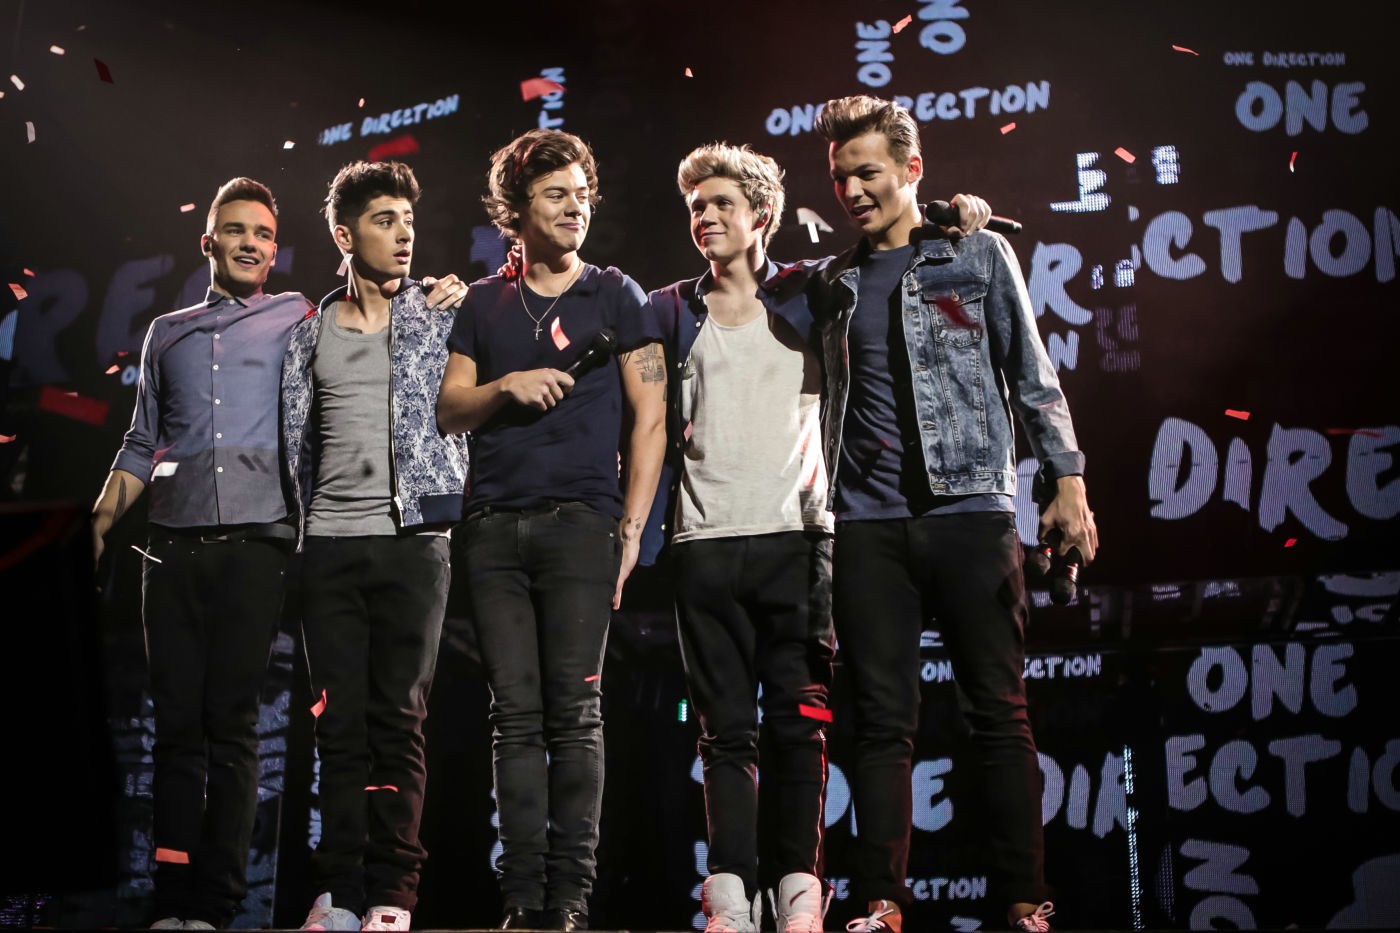 One Direction: This Is Us #5